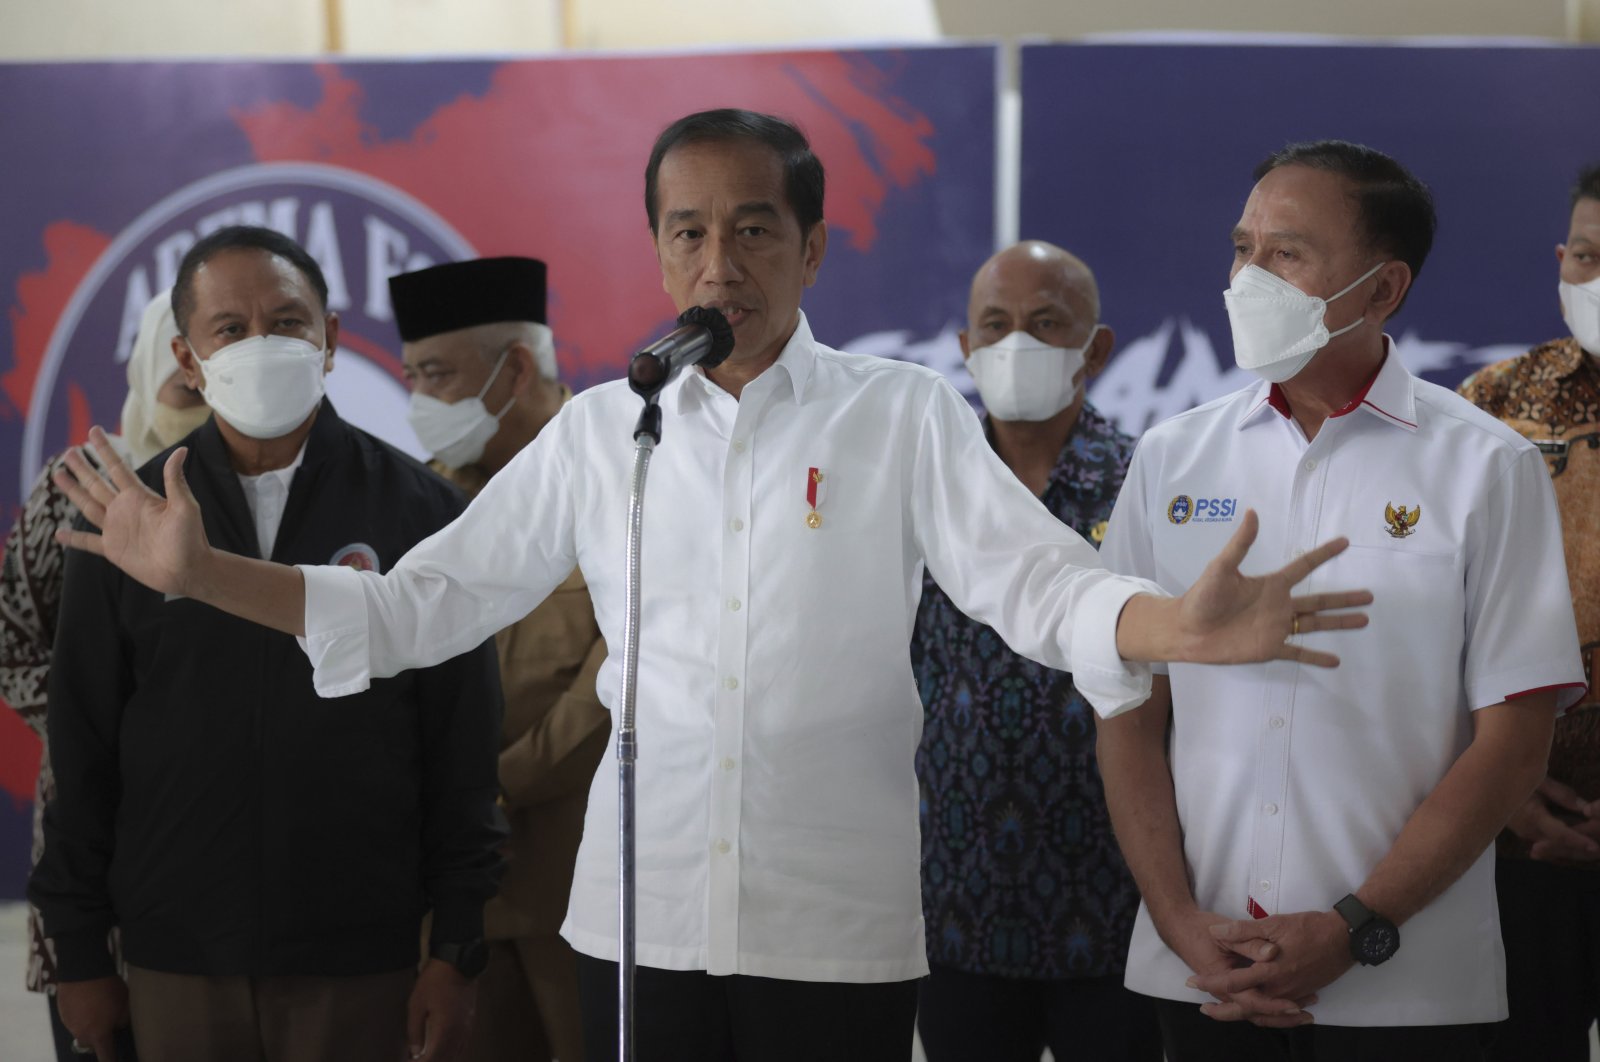 Indonesian President Joko Widodo speaks to the media during a press conference at Kanjuruhan Stadium, where a soccer stampede killed more than 100 people, Malang, East Java, Indonesia, Oct. 5, 2022.  (AP Photo)